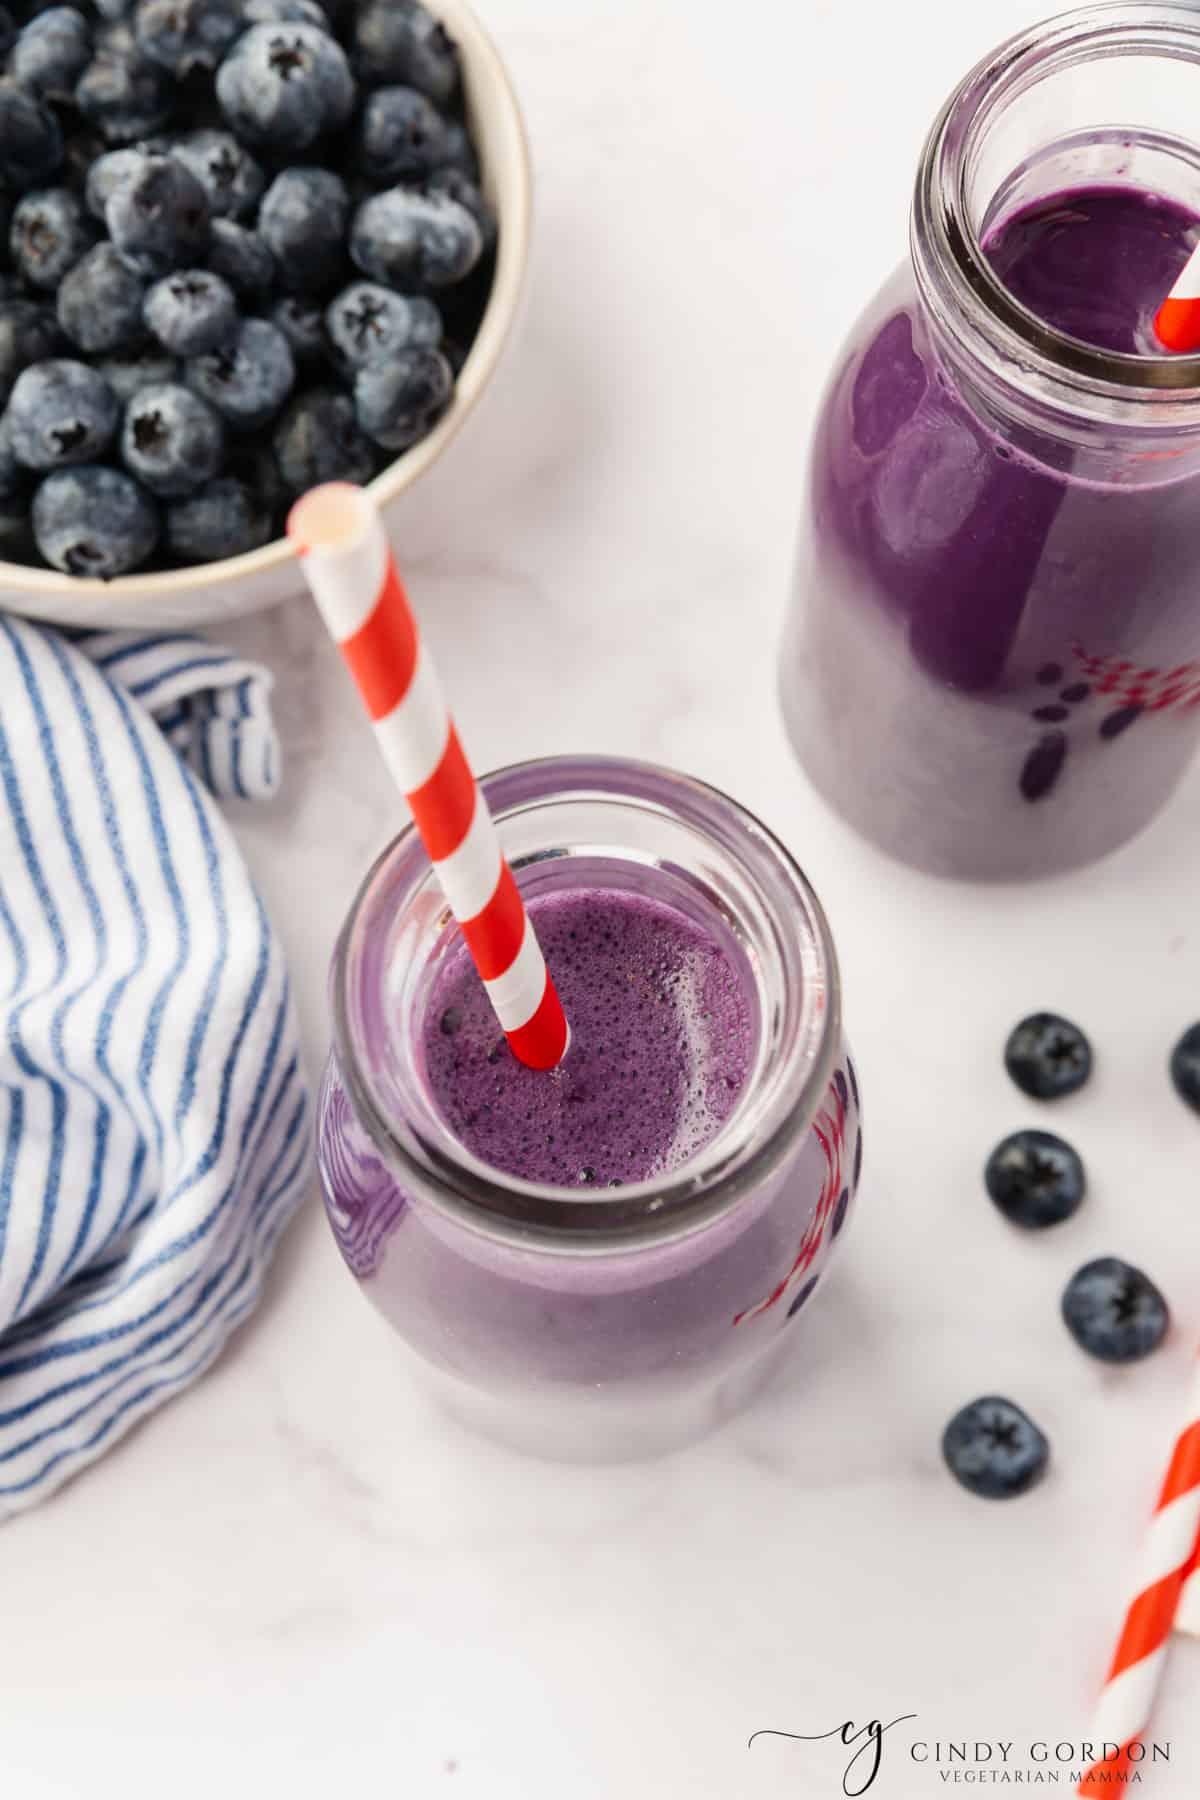 vertical photo showing 2 small bottles of blueberry milk with straws in them from overhead, surrounded by a bowl of blueberries and some loose blueberries all on a white surface